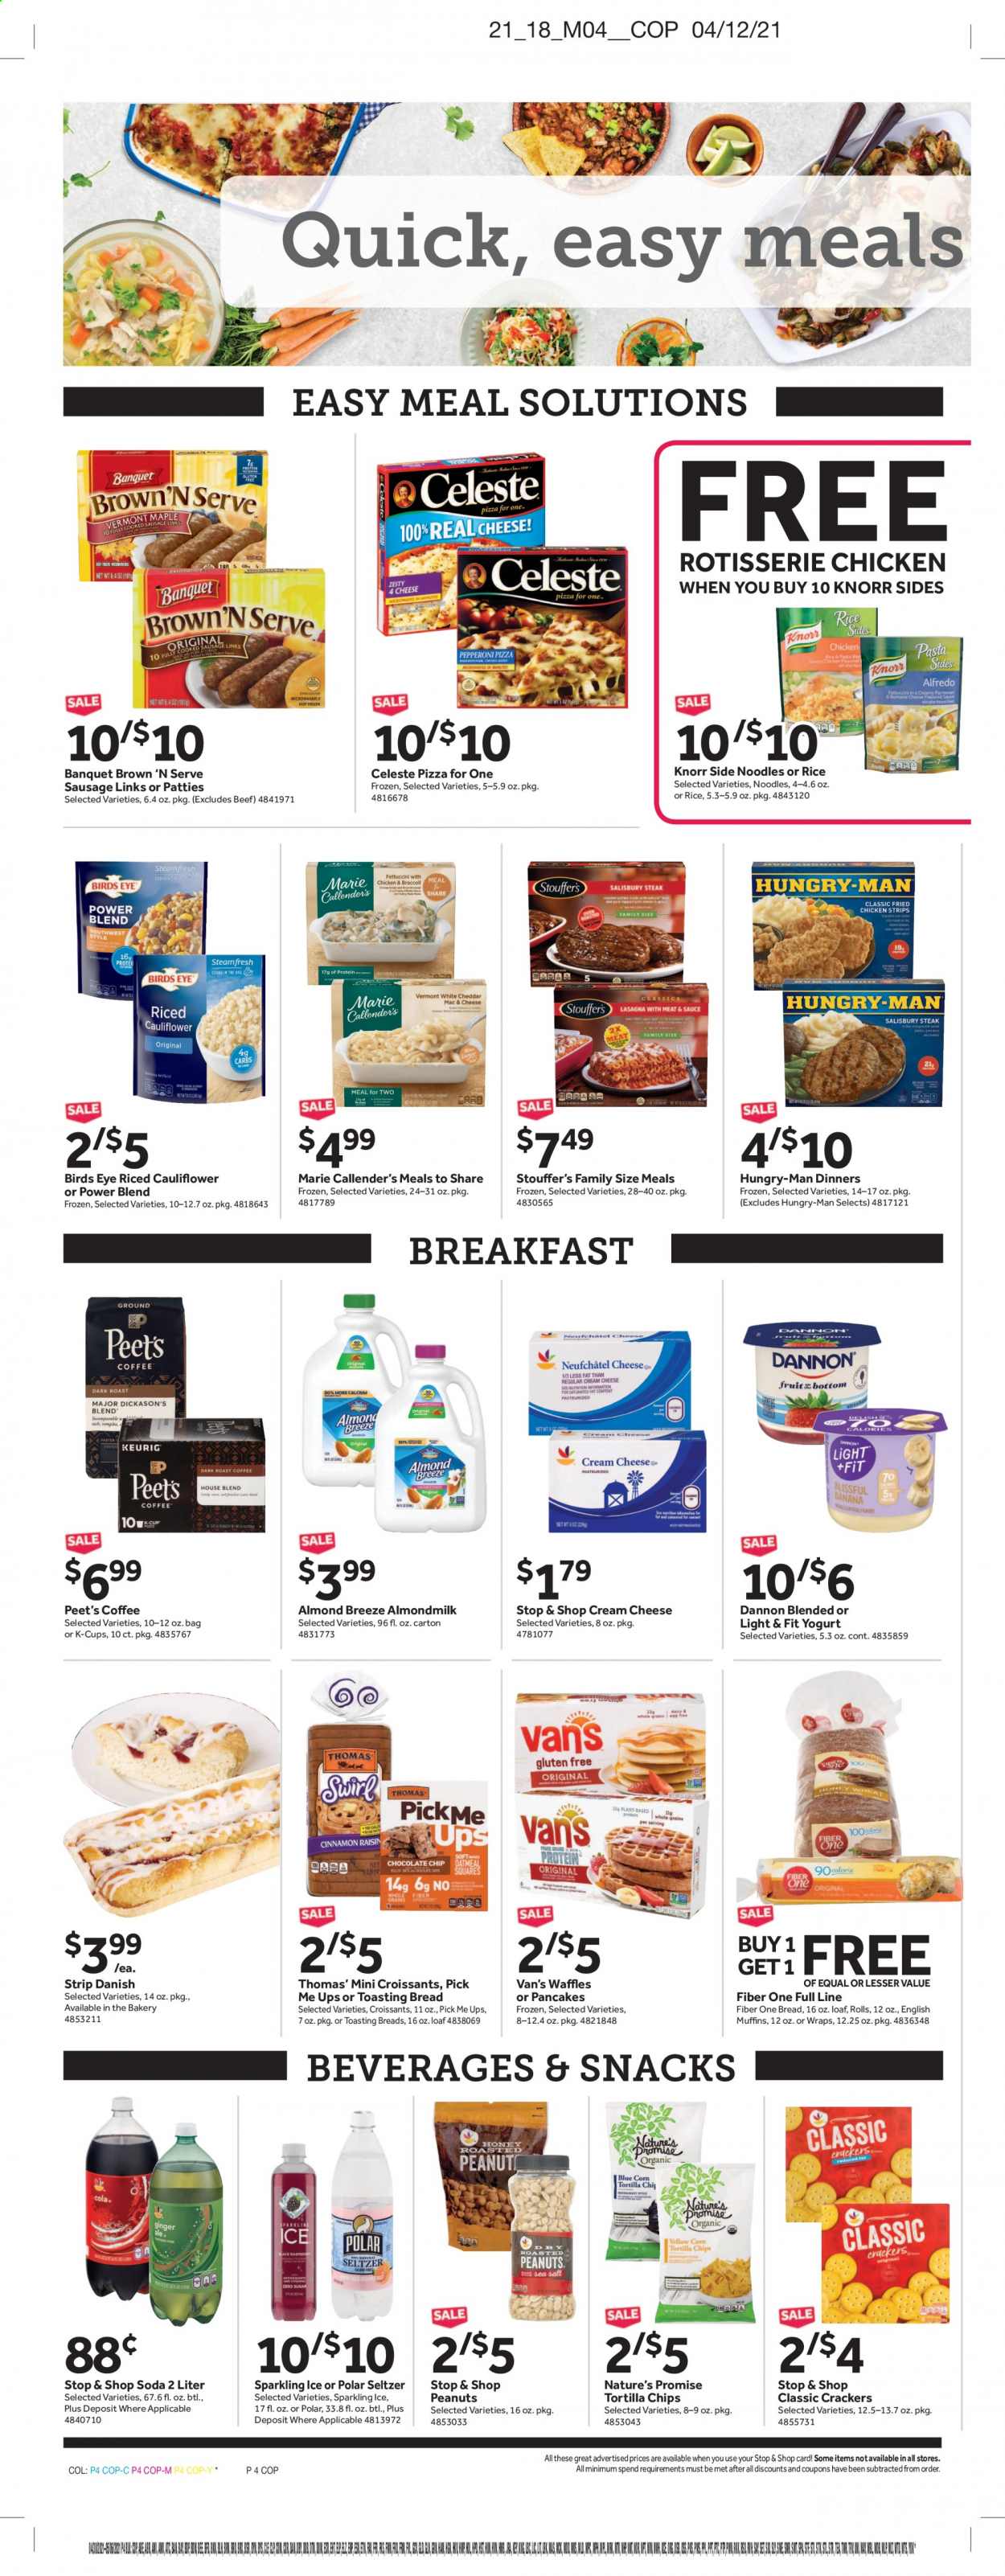 thumbnail - Stop & Shop Flyer - 04/30/2021 - 05/06/2021 - Sales products - Nature’s Promise, wraps, pizza, chicken roast, Knorr, Bird's Eye, noodles, Marie Callender's, ham, sausage, Brown 'N Serve, cream cheese, yoghurt, Dannon, almond milk, Almond Breeze, Celeste, snack, crackers, tortilla chips, Fiber One, peanuts, soda, seltzer water, tea, coffee capsules, K-Cups, red wine, wine. Page 6.